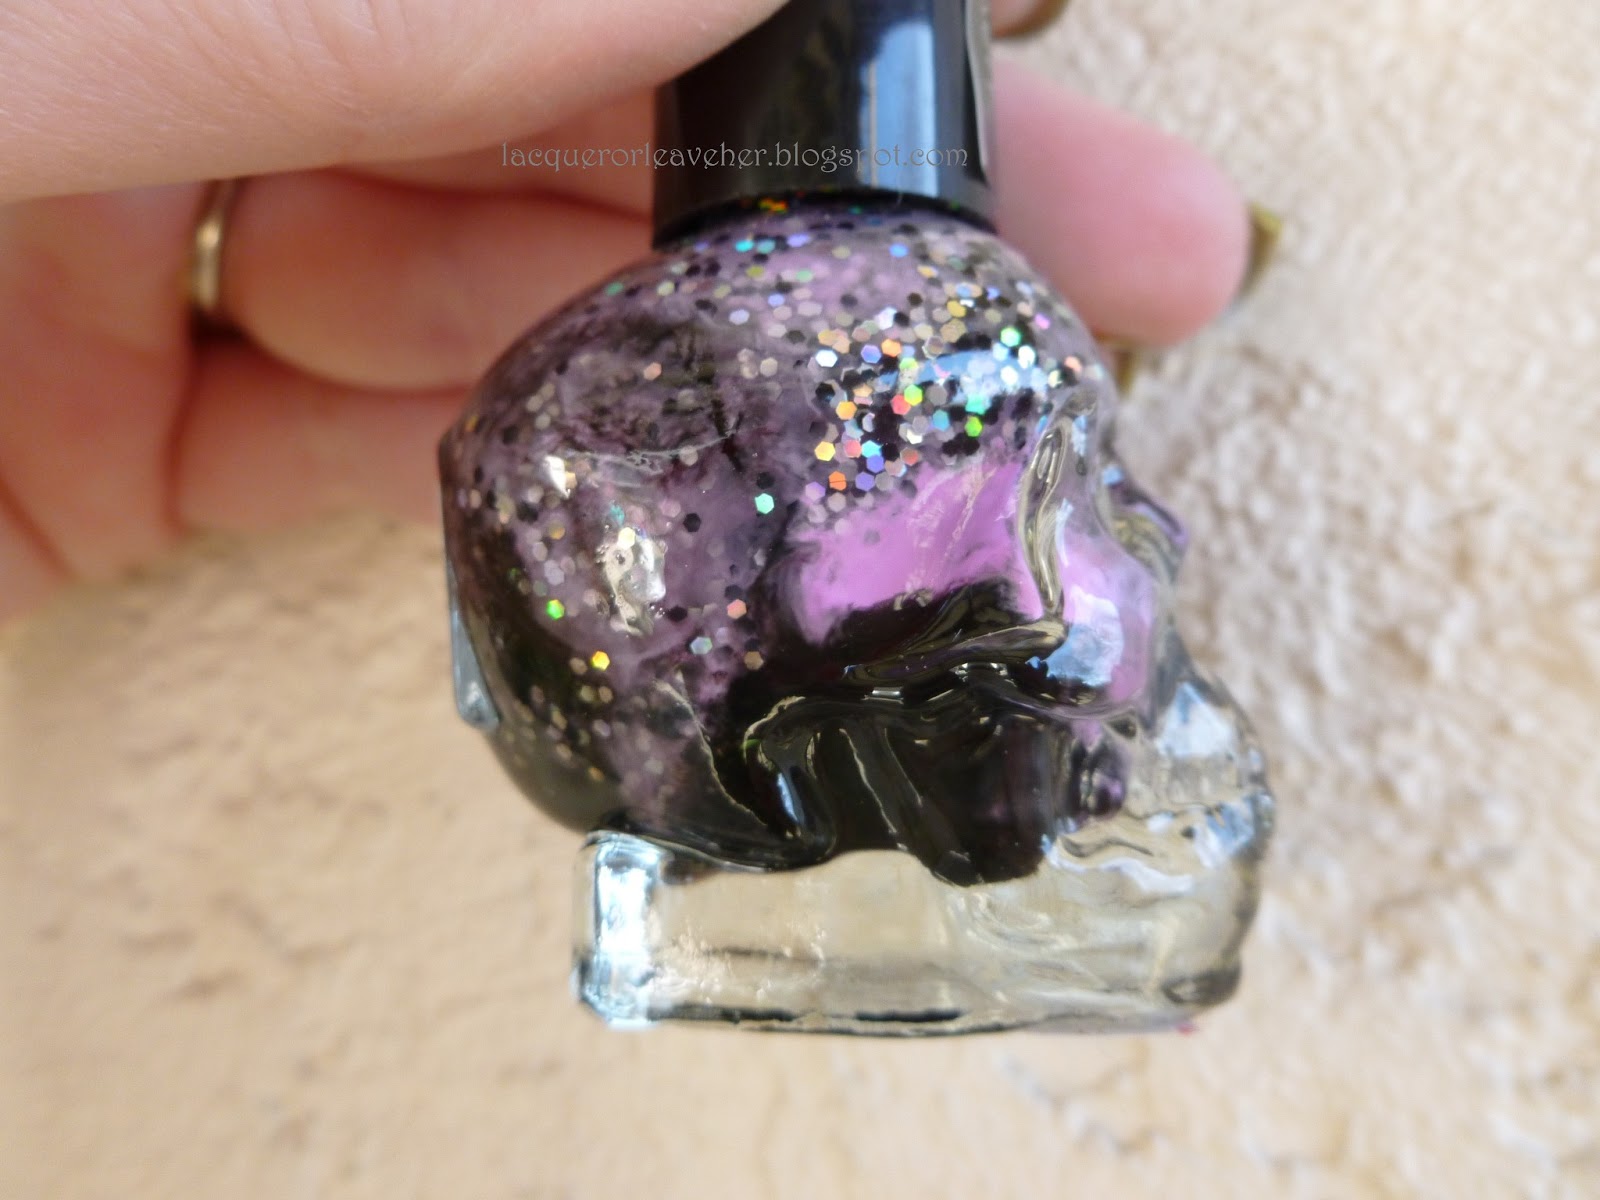 Lacquer or Leave Her!: UPDATED! Review: Blackheart Beauty Stacked nail ...